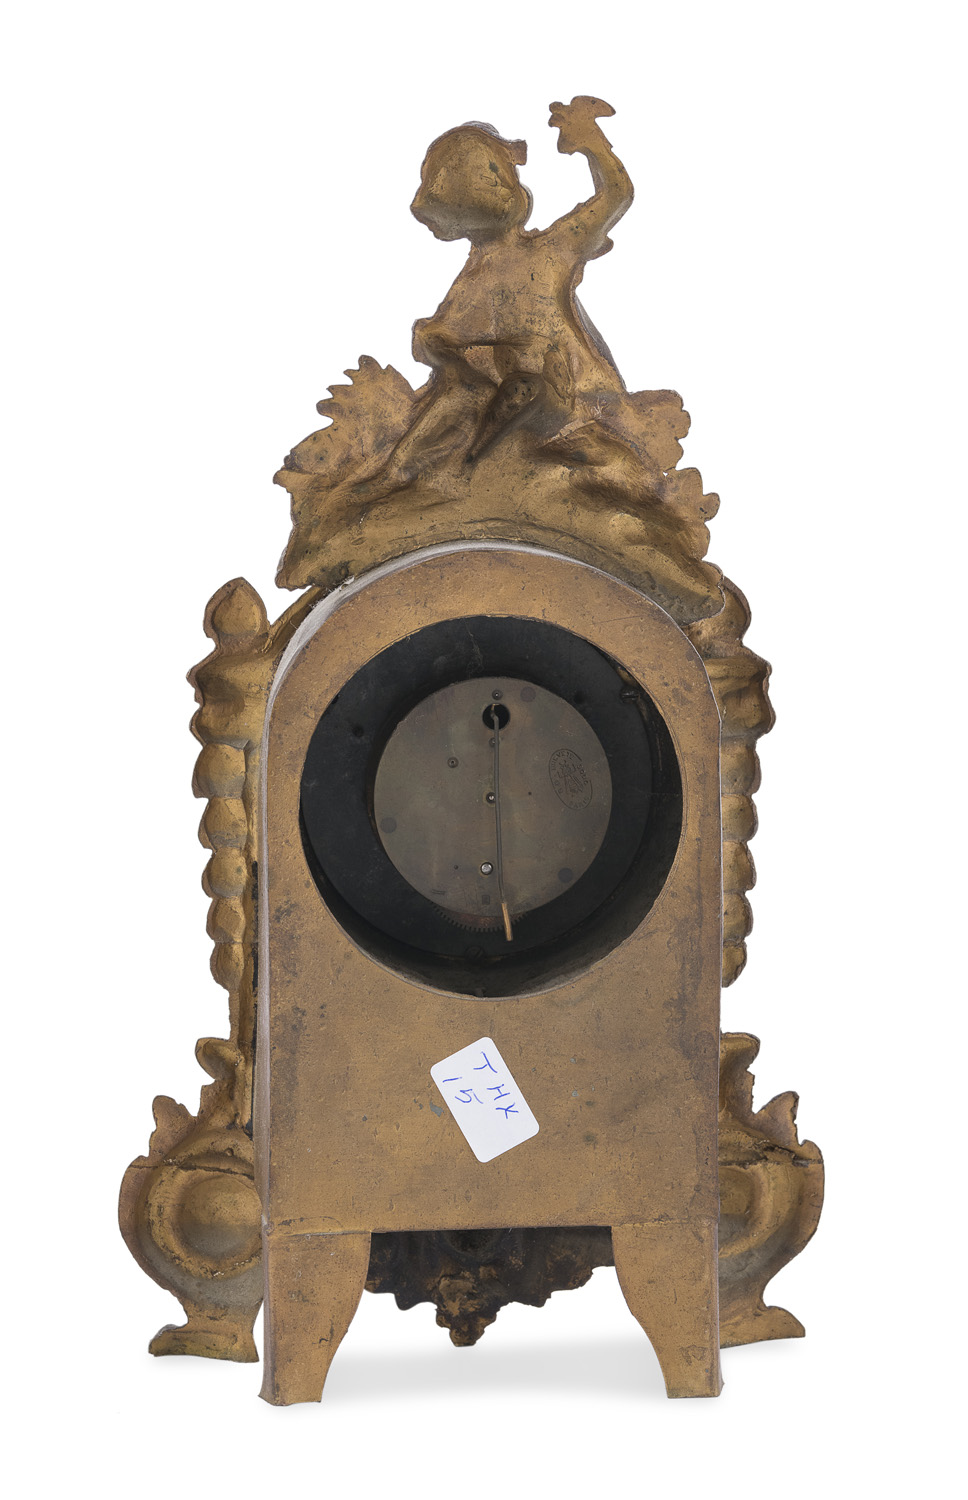 SMALL METAL TABLE CLOCK 19th CENTURY - Image 2 of 2